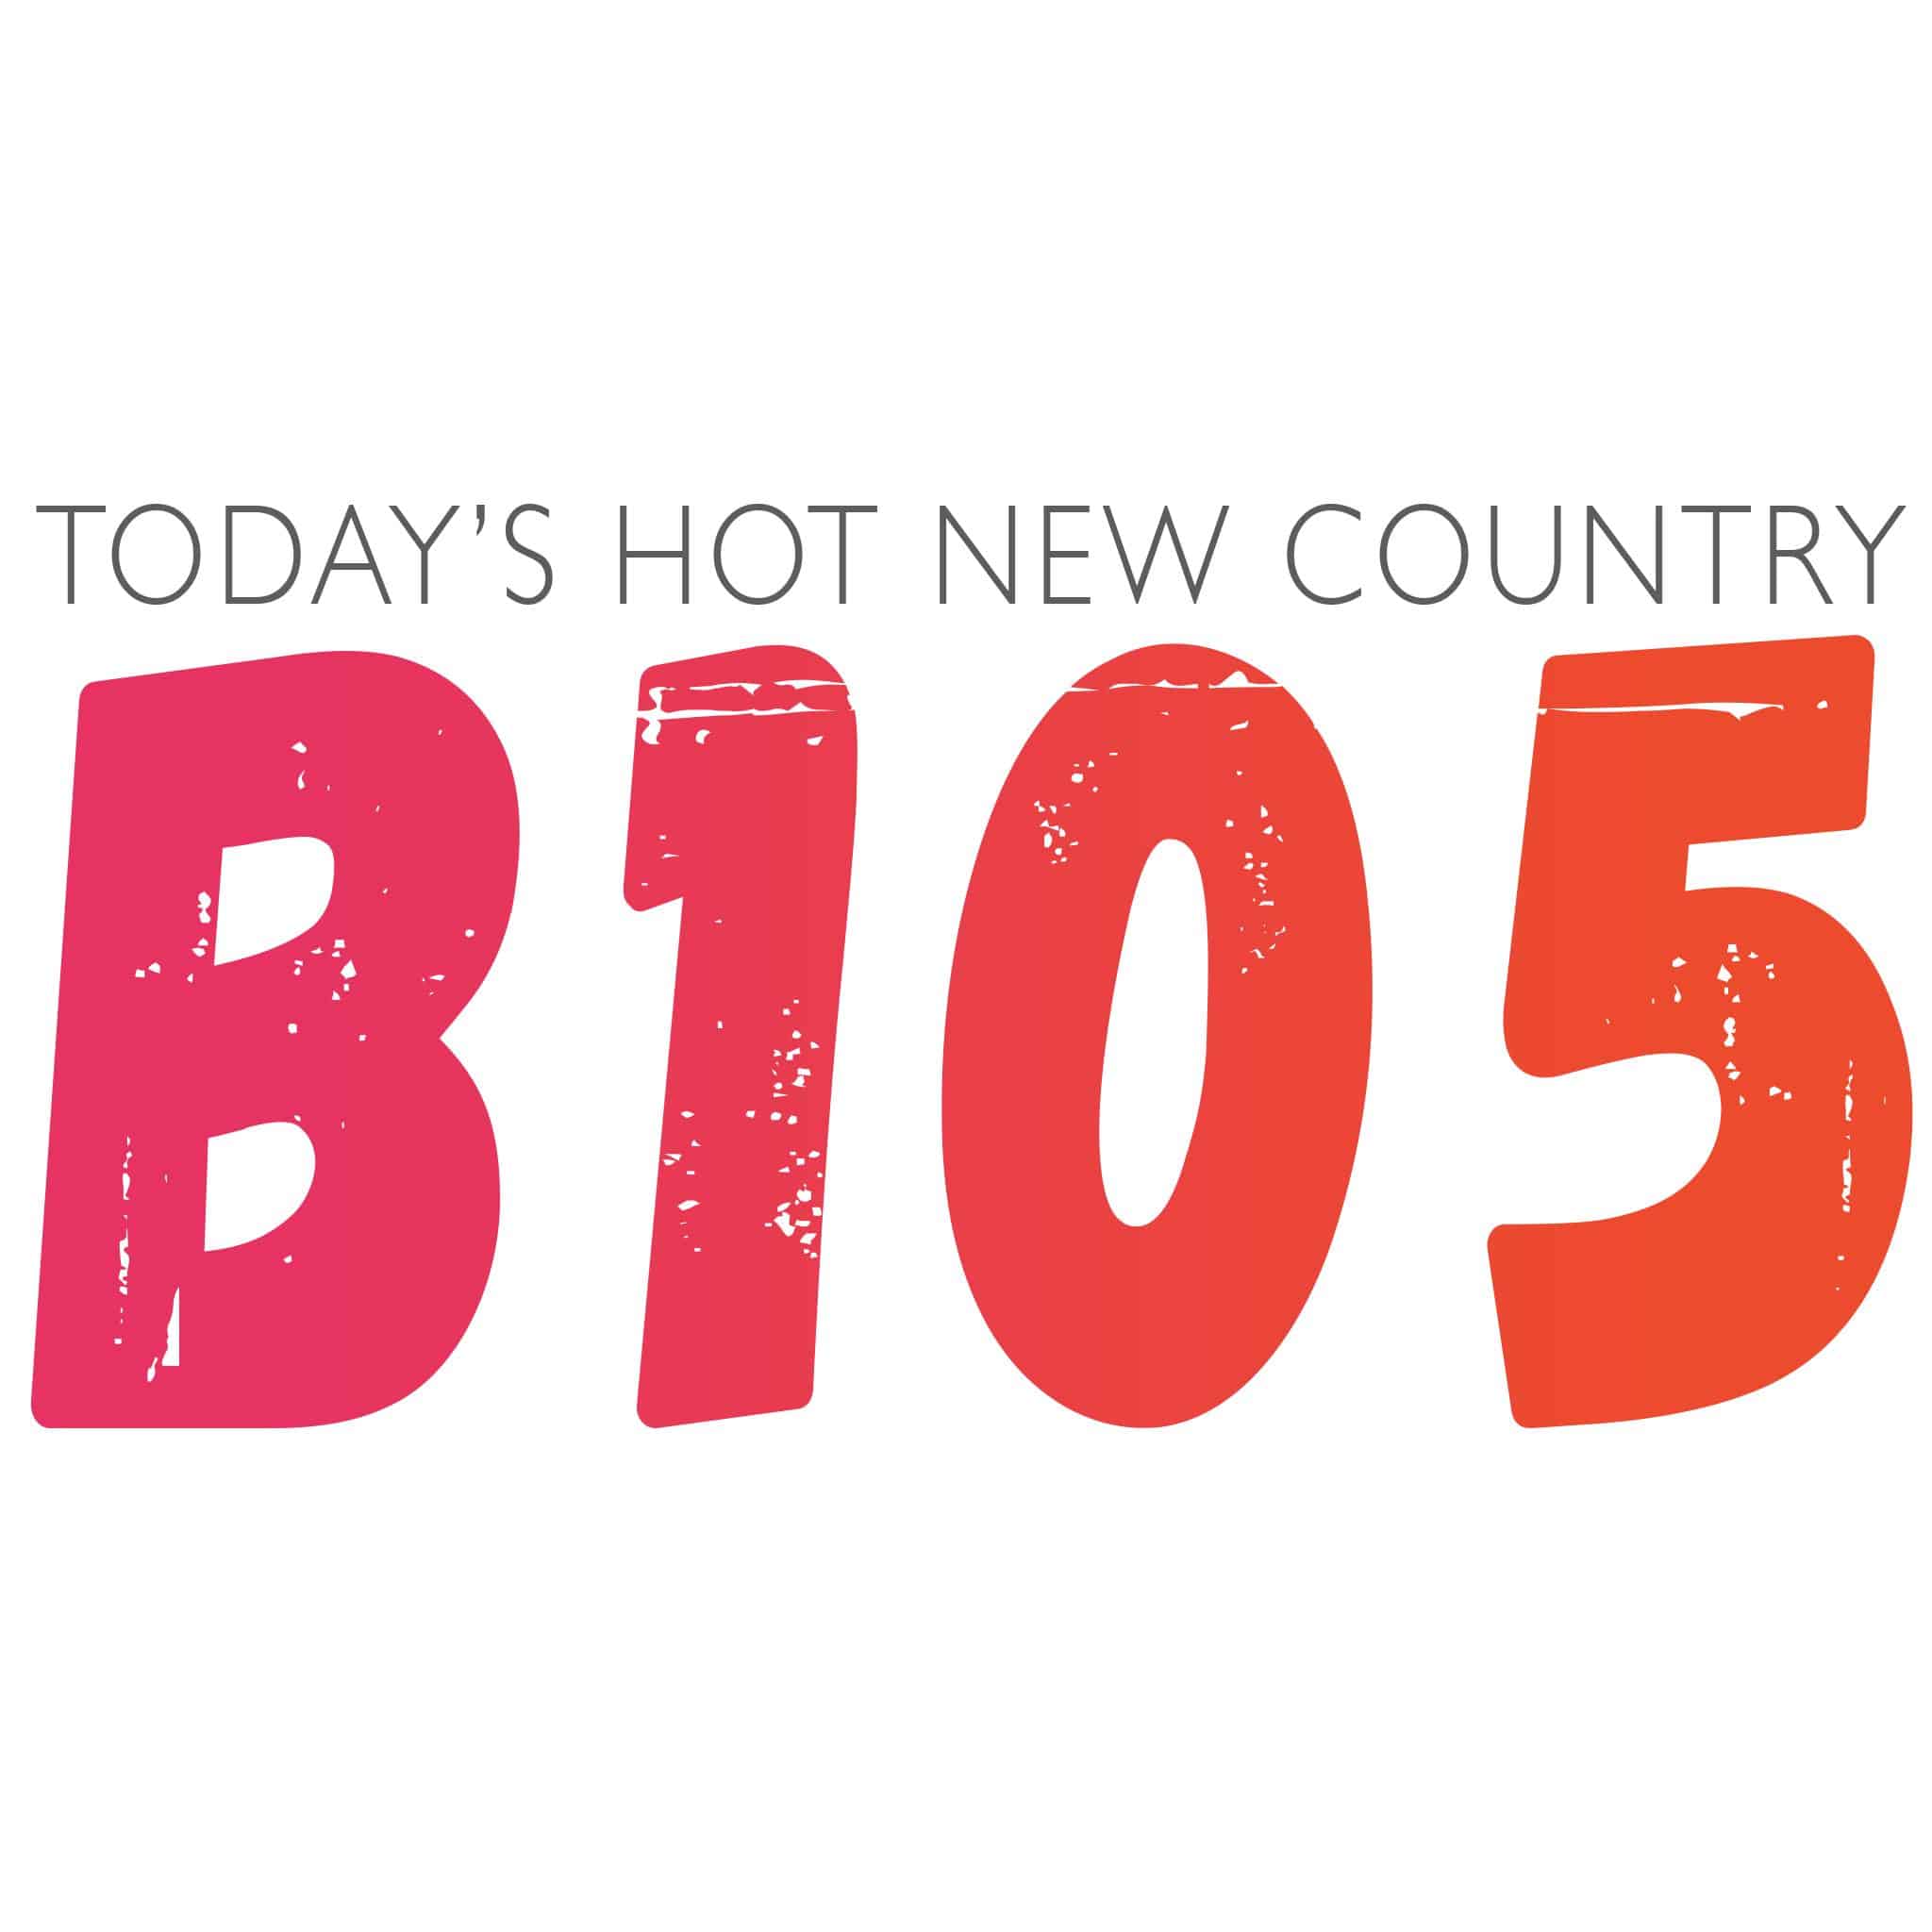 iMedia1 Network: Today’s Hot Country B105